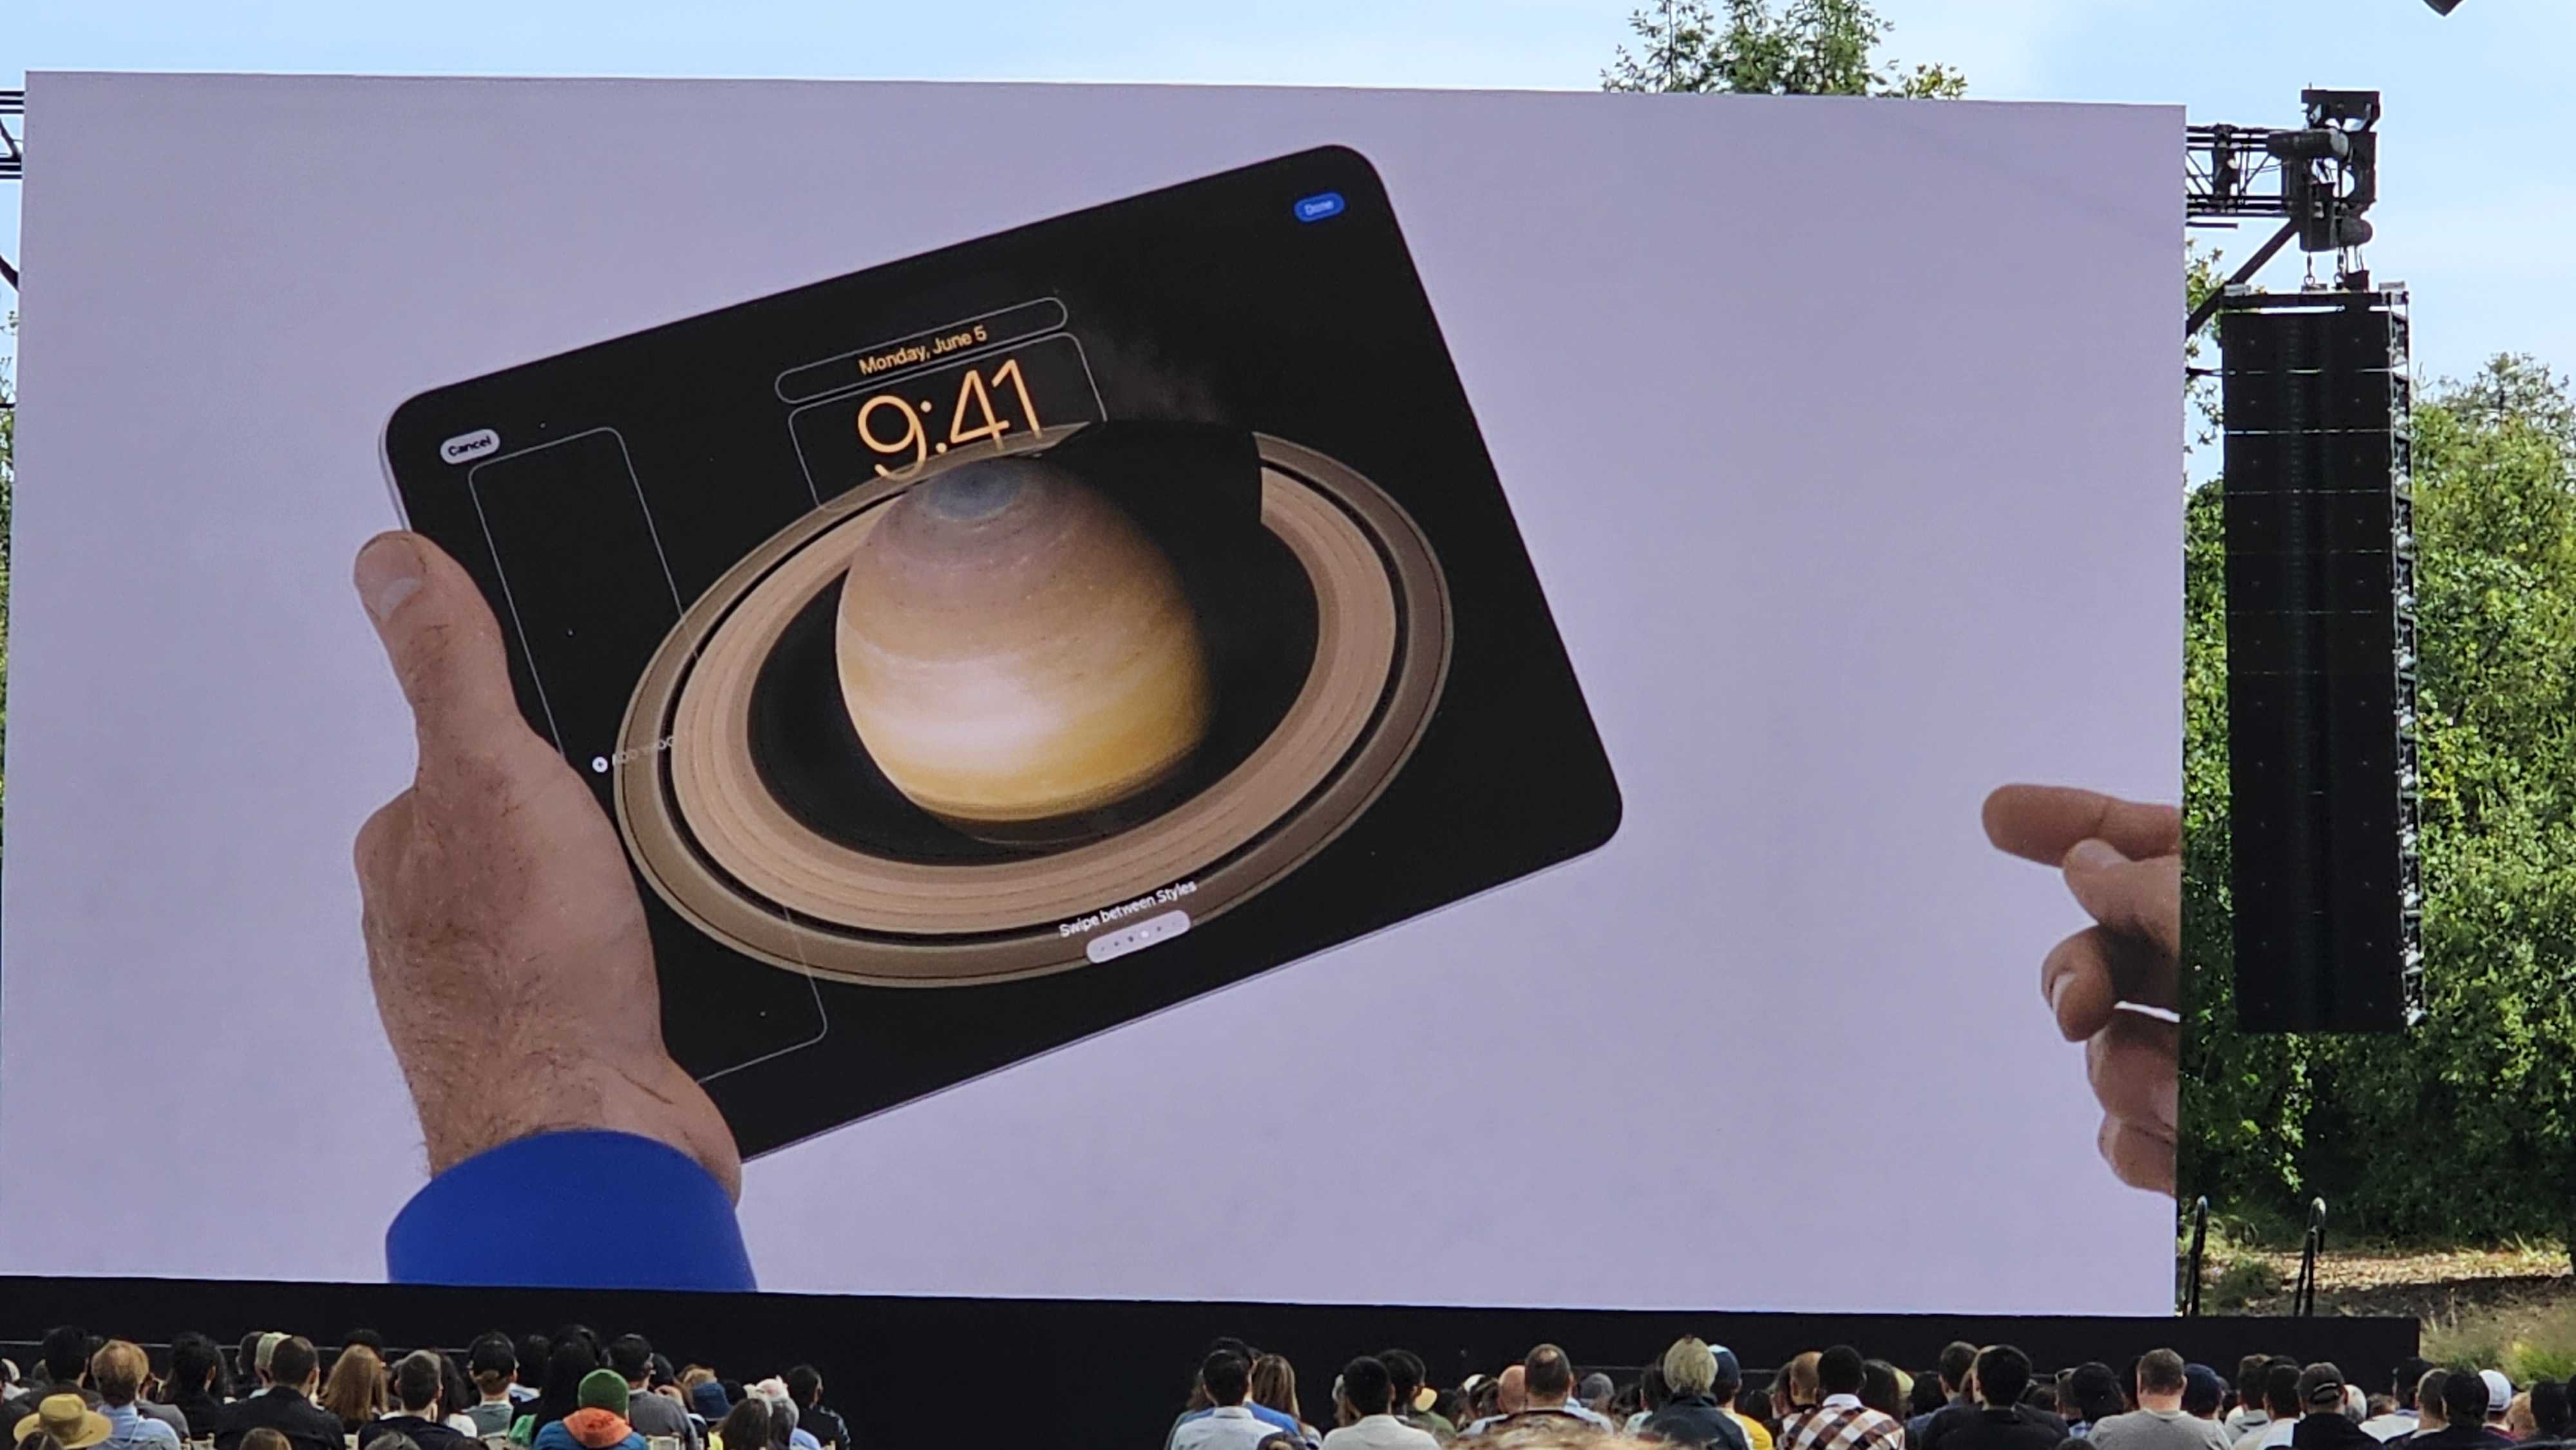 Astronomy wallpaper on new iPad OS at WWDC 2023